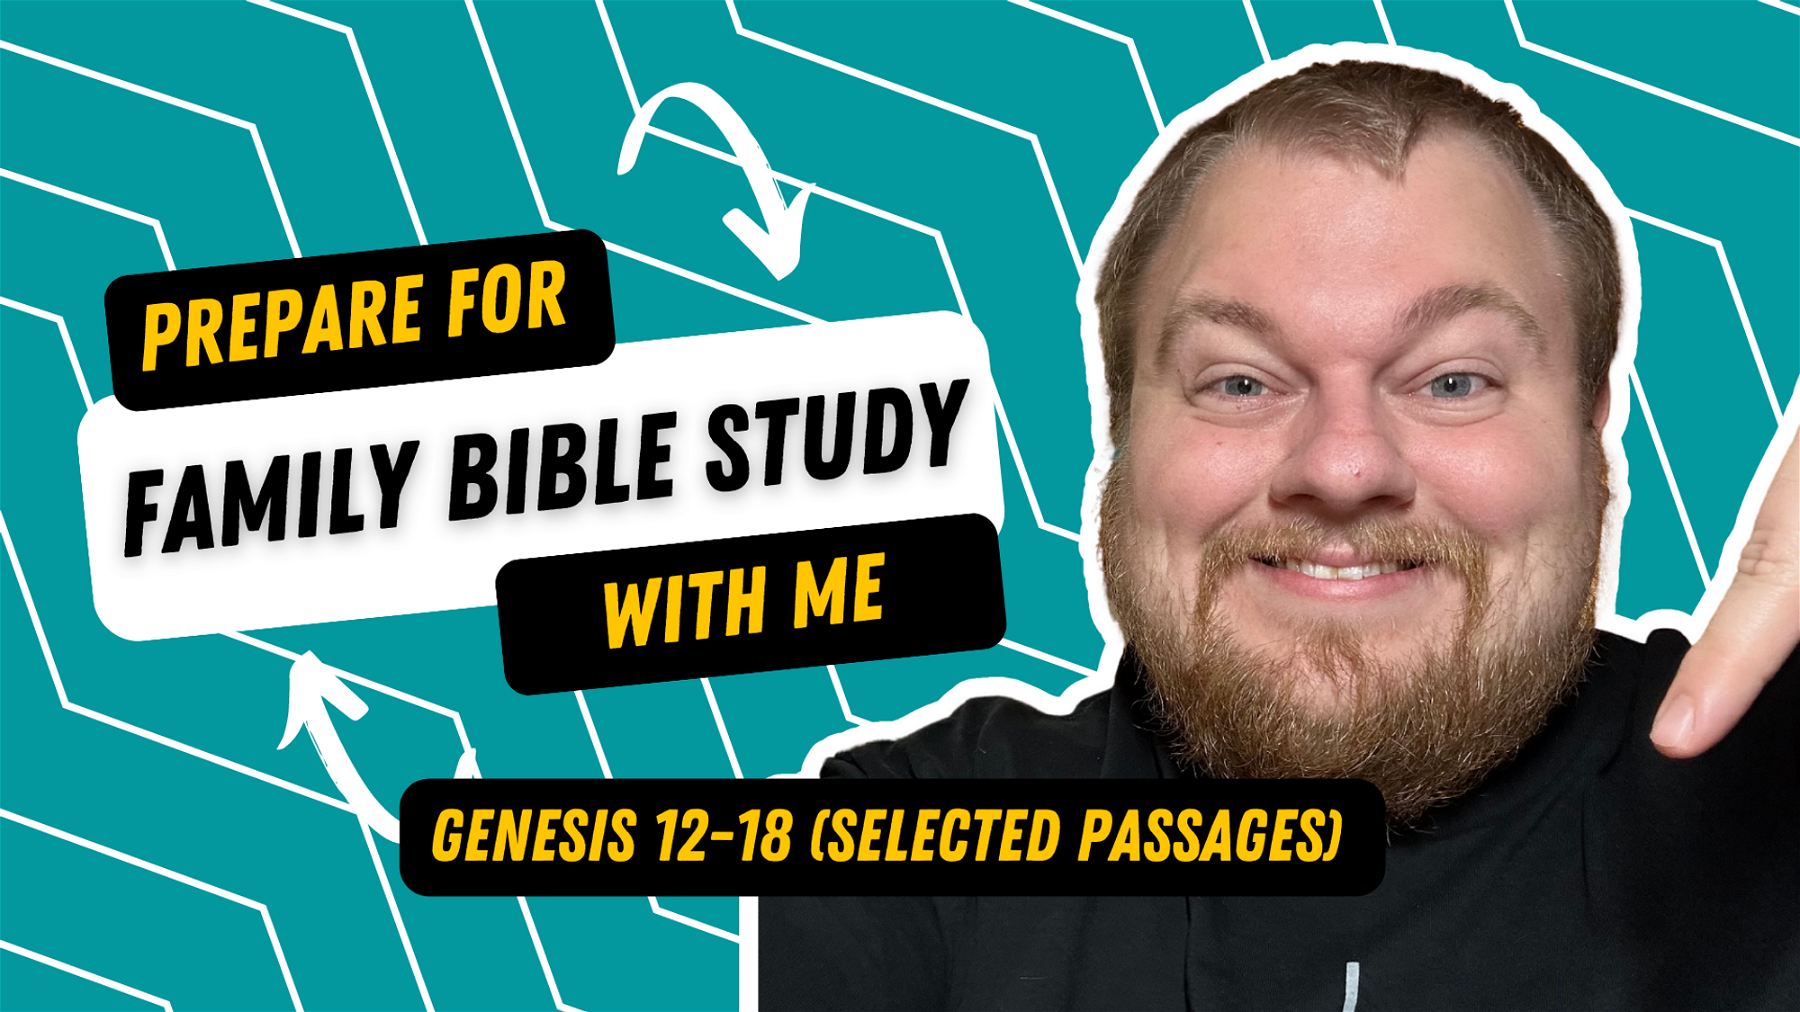 Let’s Study Genesis 12-18 (Selected Passages) - Prepare for Family Bible Study with Me